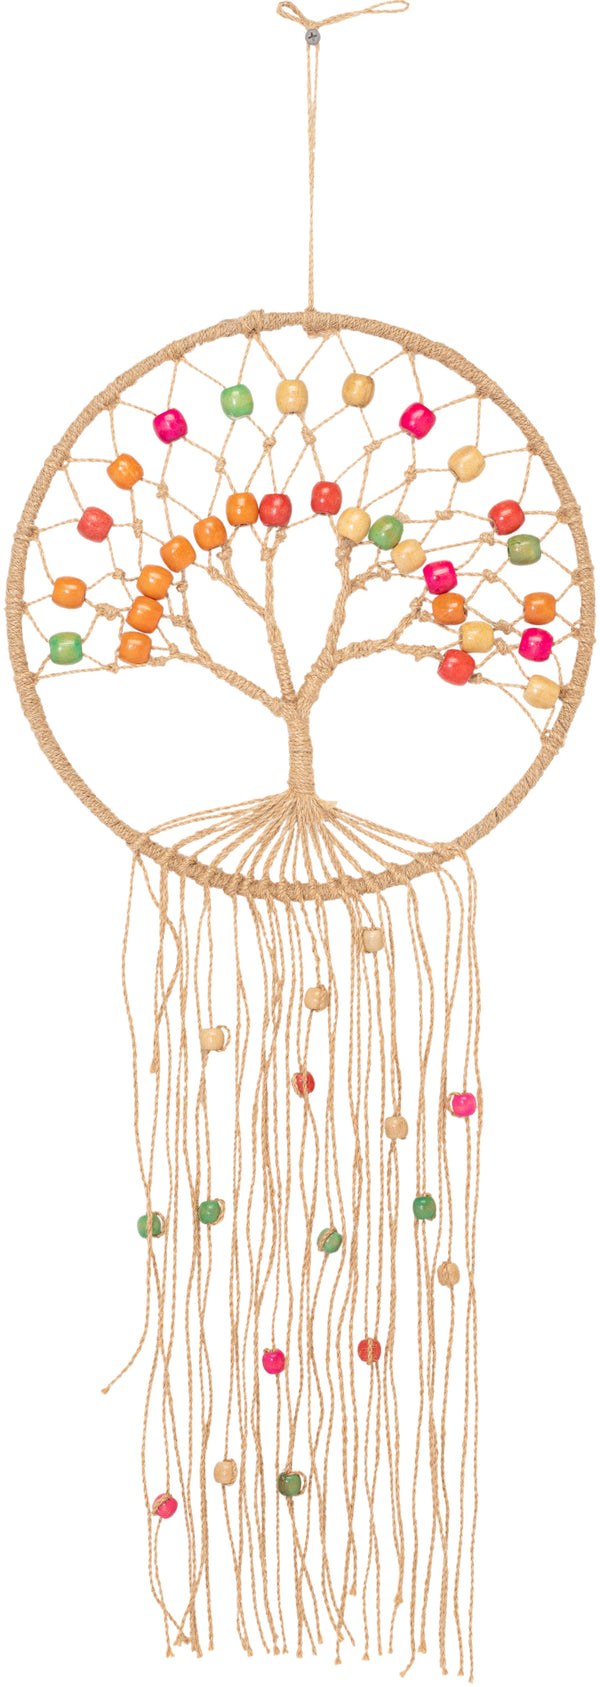 Tree of Life TOL-1000 26"H x 11"W Wall Hanging